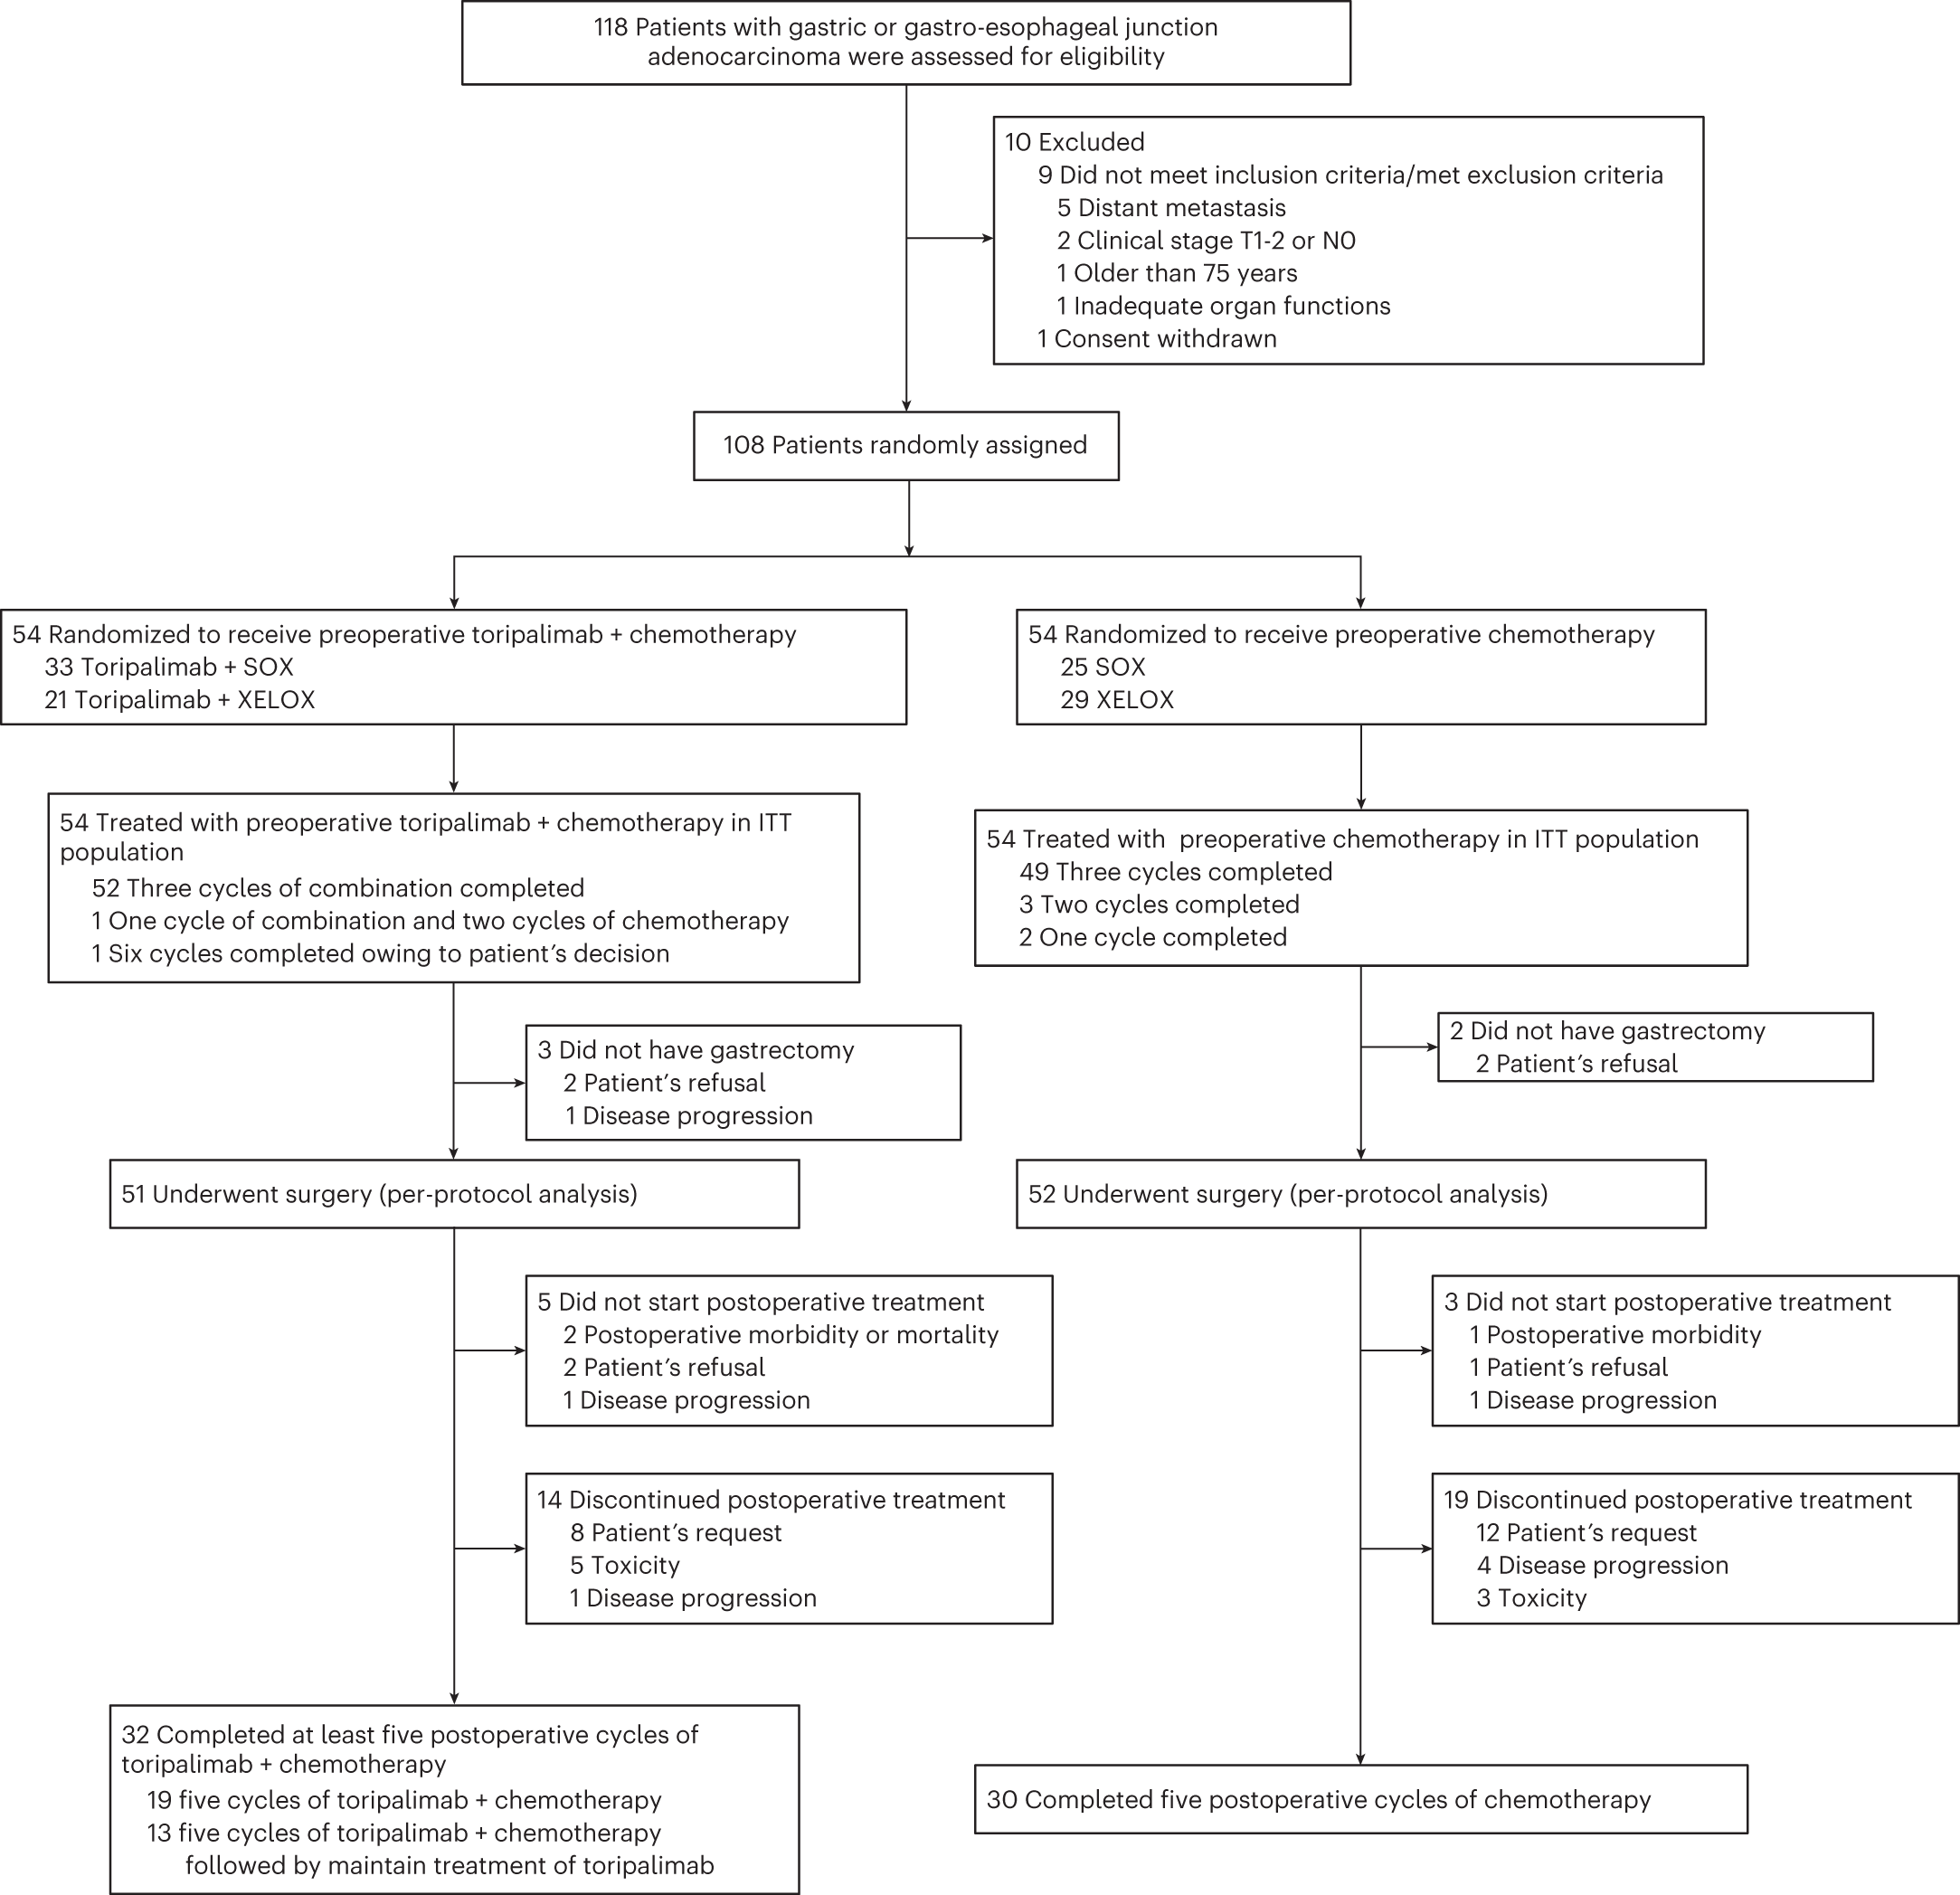 Perioperative toripalimab and chemotherapy in locally advanced gastric or  gastro-esophageal junction cancer: a randomized phase 2 trial